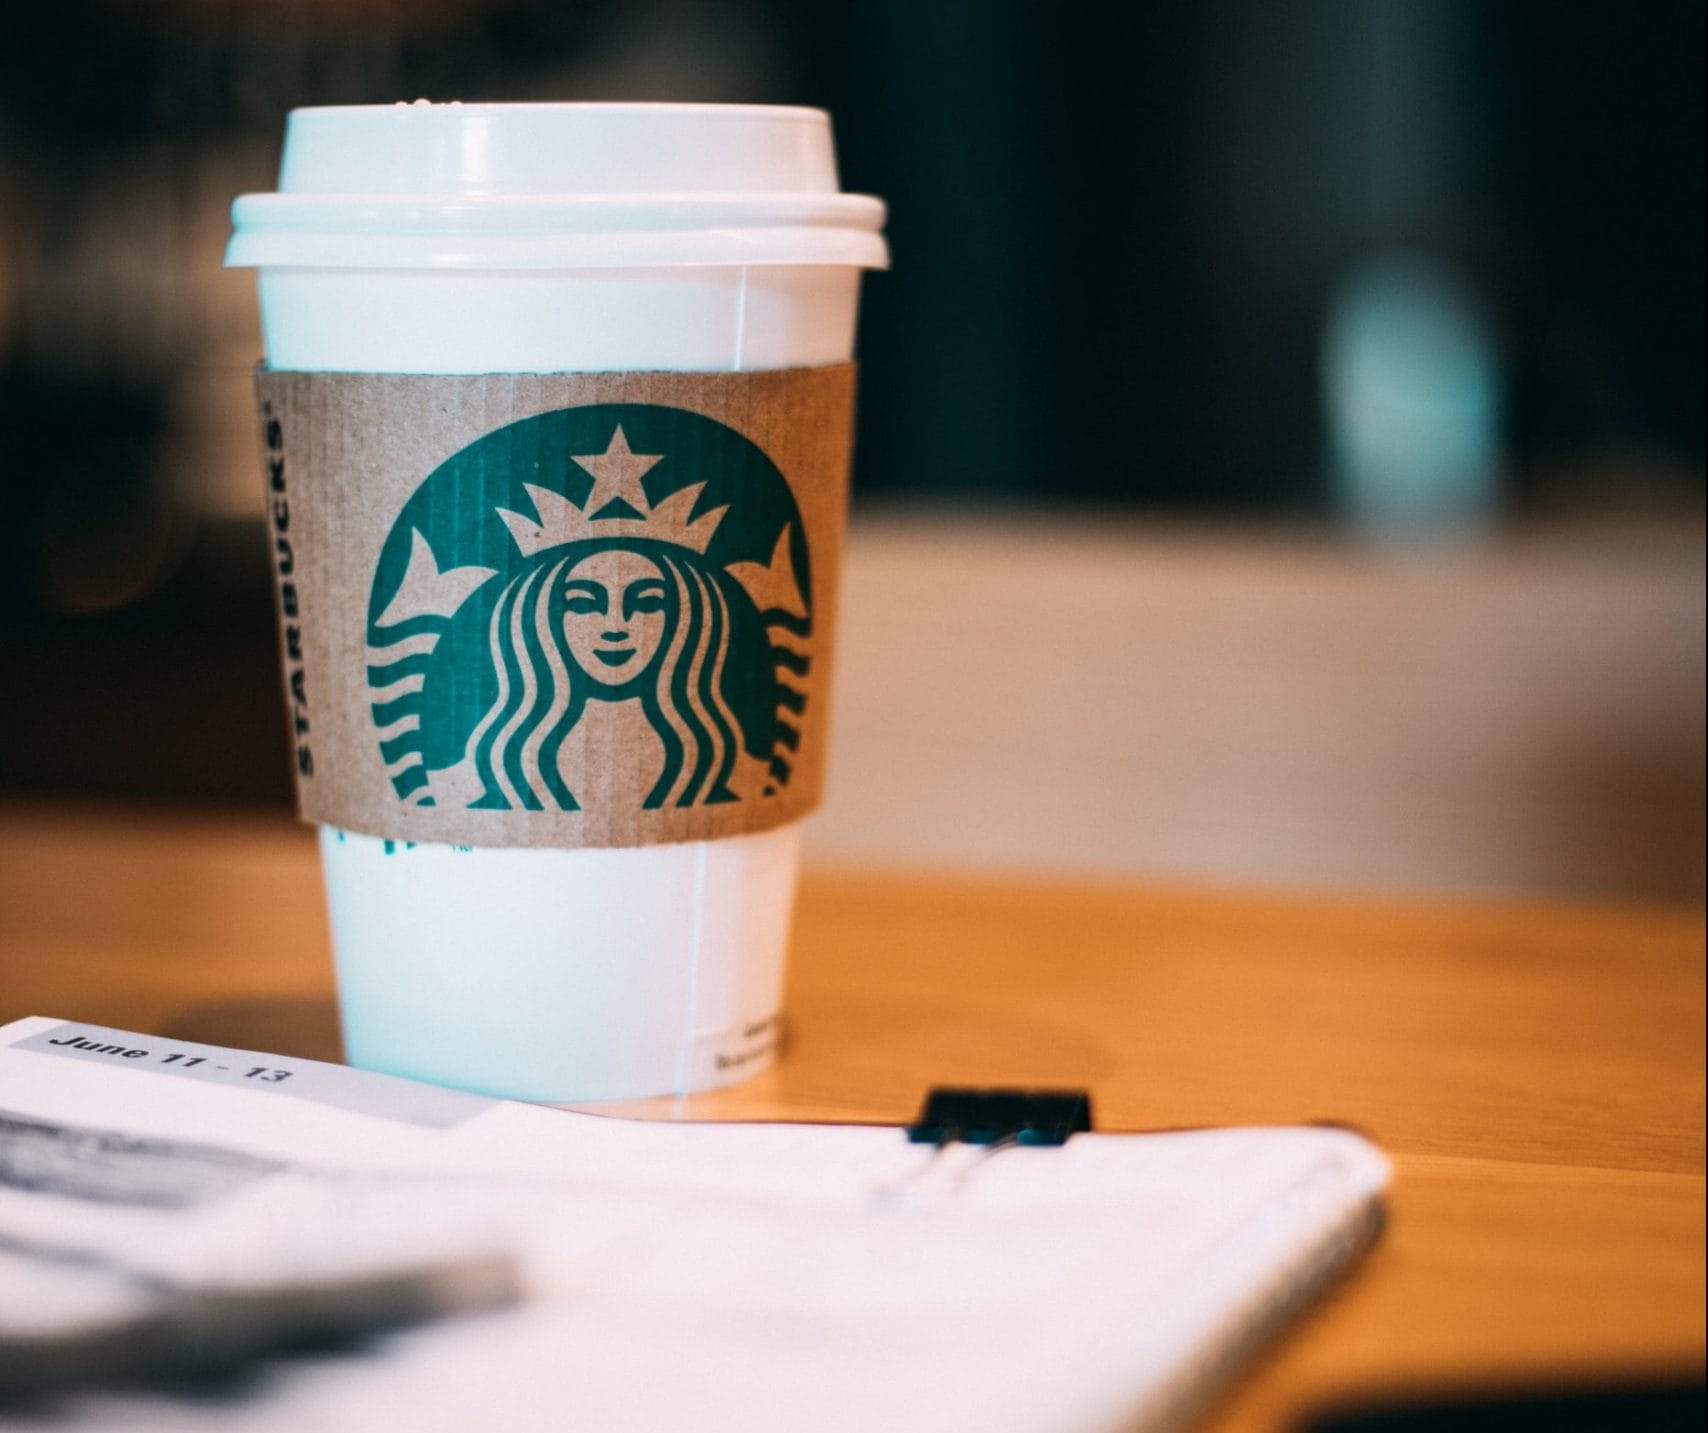 Your SSN costs less than a Starbucks coffee on the dark web